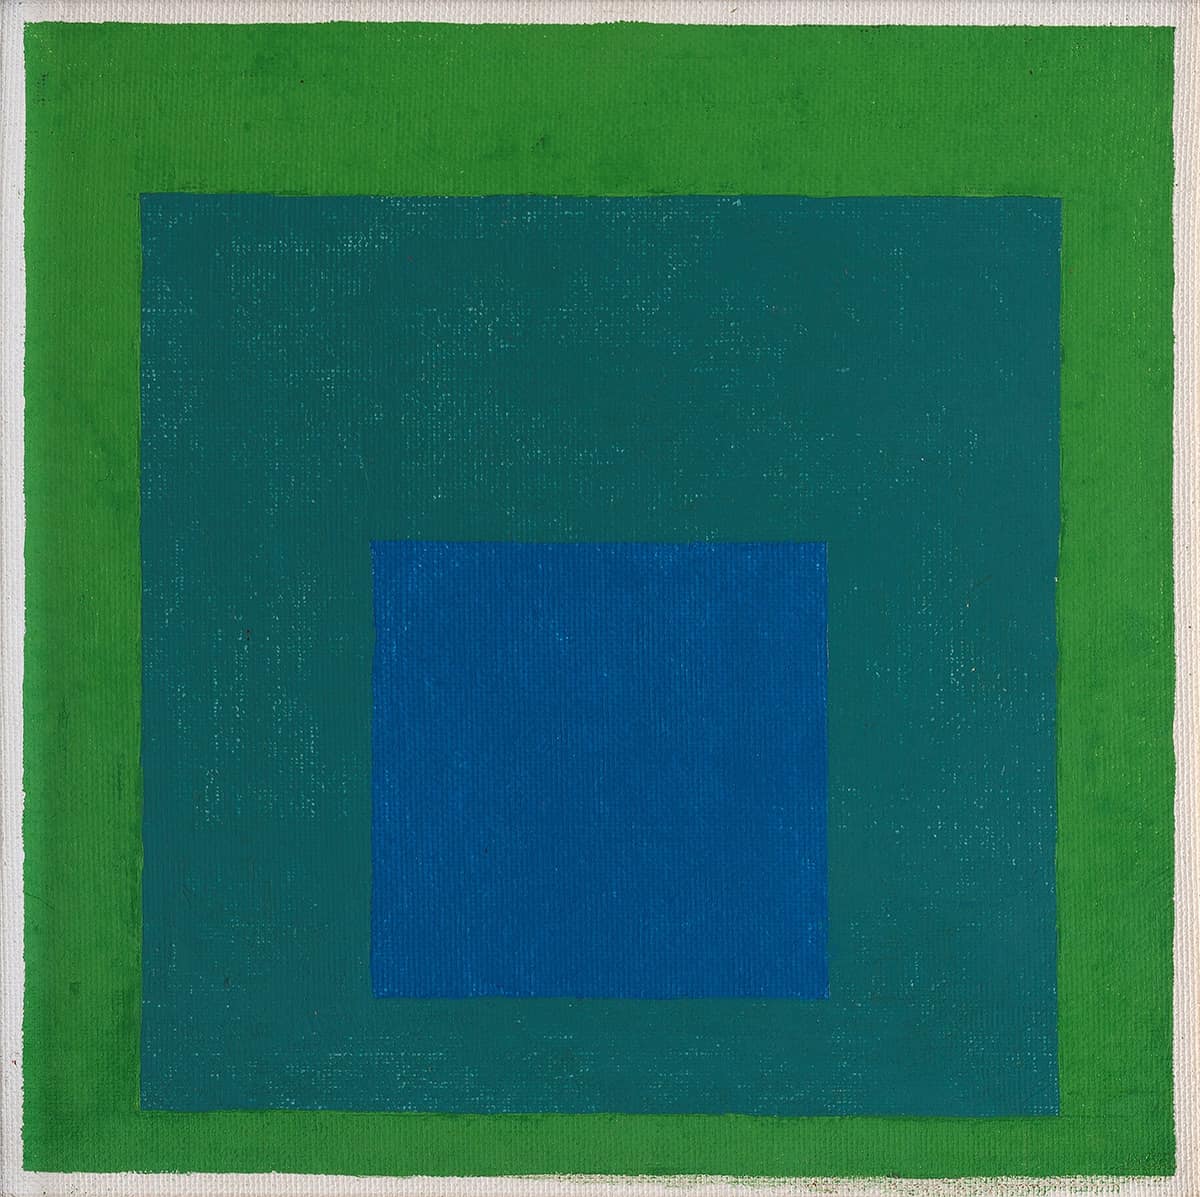 Homage To The Square by Josef Albers, 1968 at Vedovi Gallery